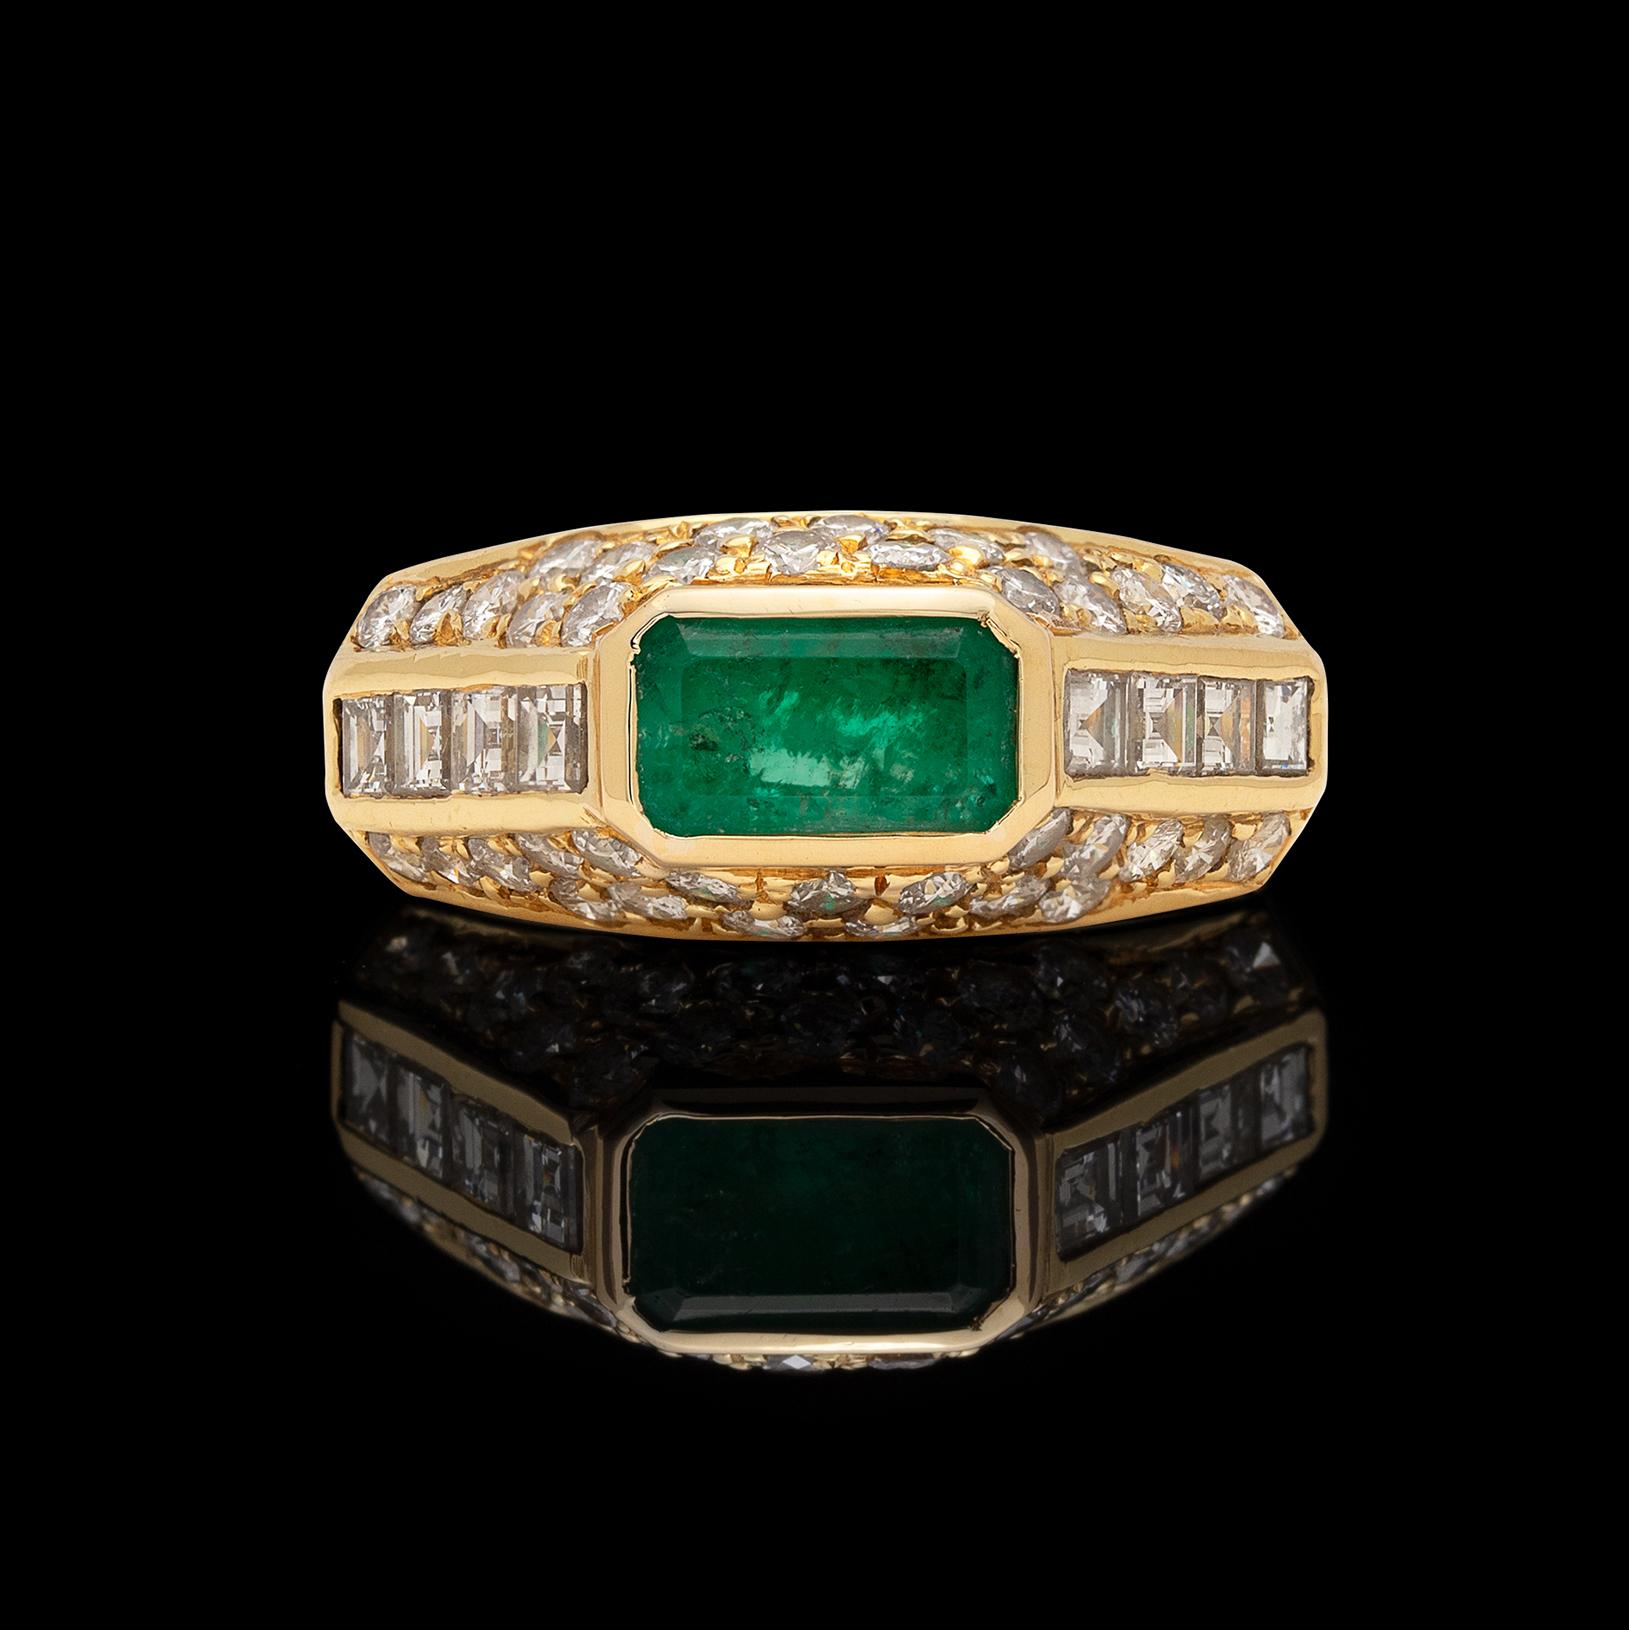 Circa 1980s, this 18k yellow gold ring is still as desirable a design today! Centering a horizontal, bezel-set emerald-cut emerald weighing approximately 2.15 carats, with the angled sides set with 46 square and round brilliant-cut diamonds,